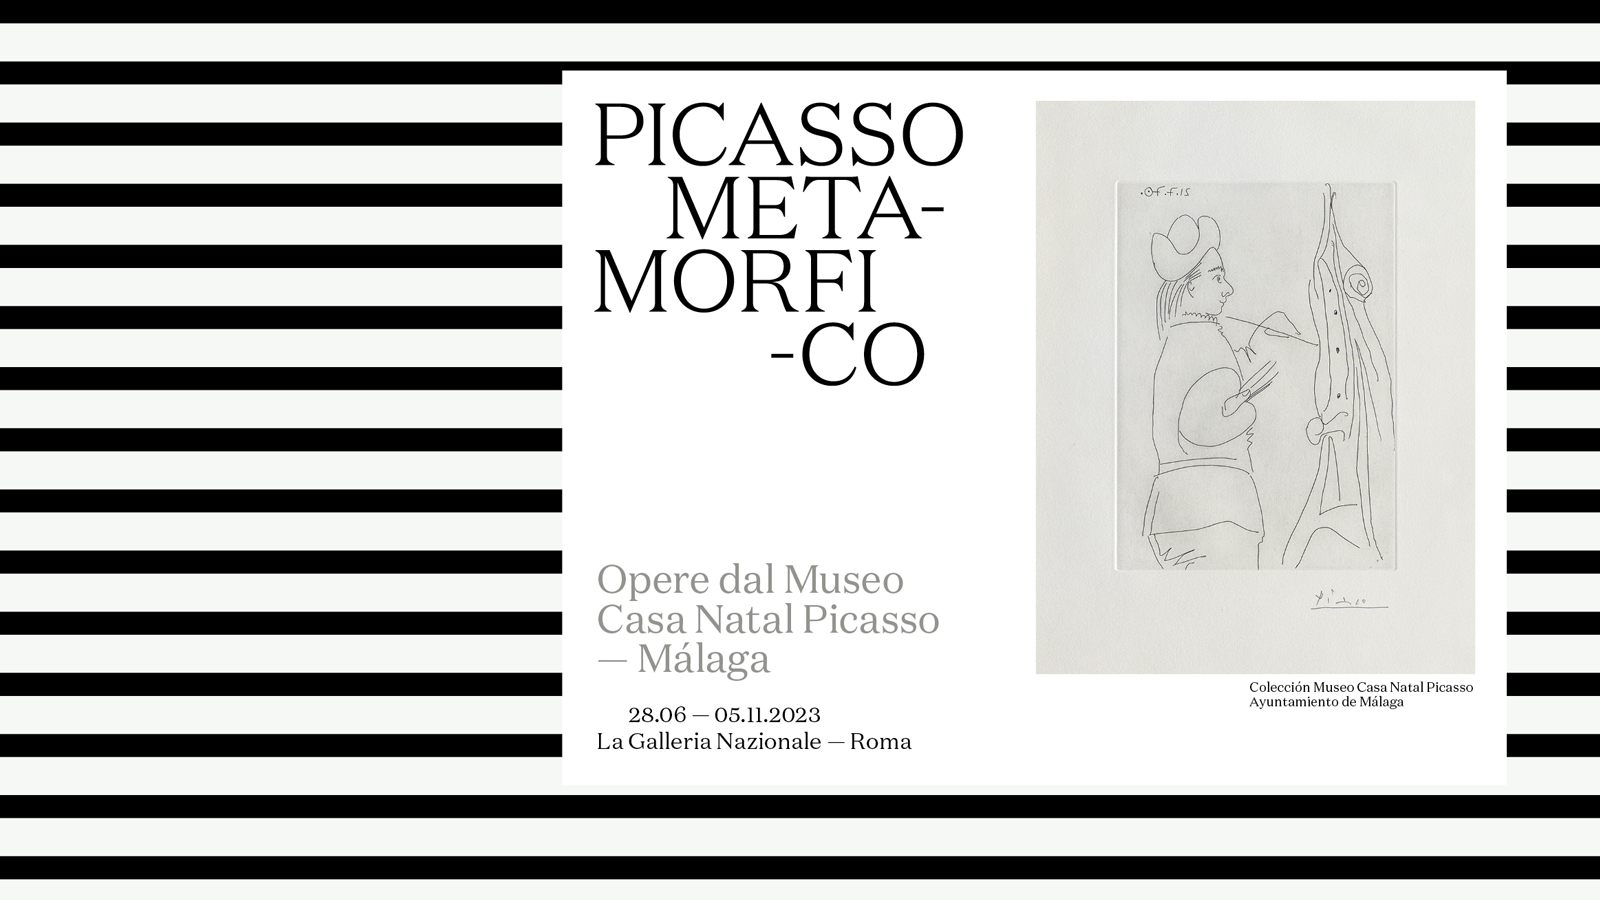 Rome, GNAM celebrates Picasso with an exhibition created by the Museo Casa Natal Picasso